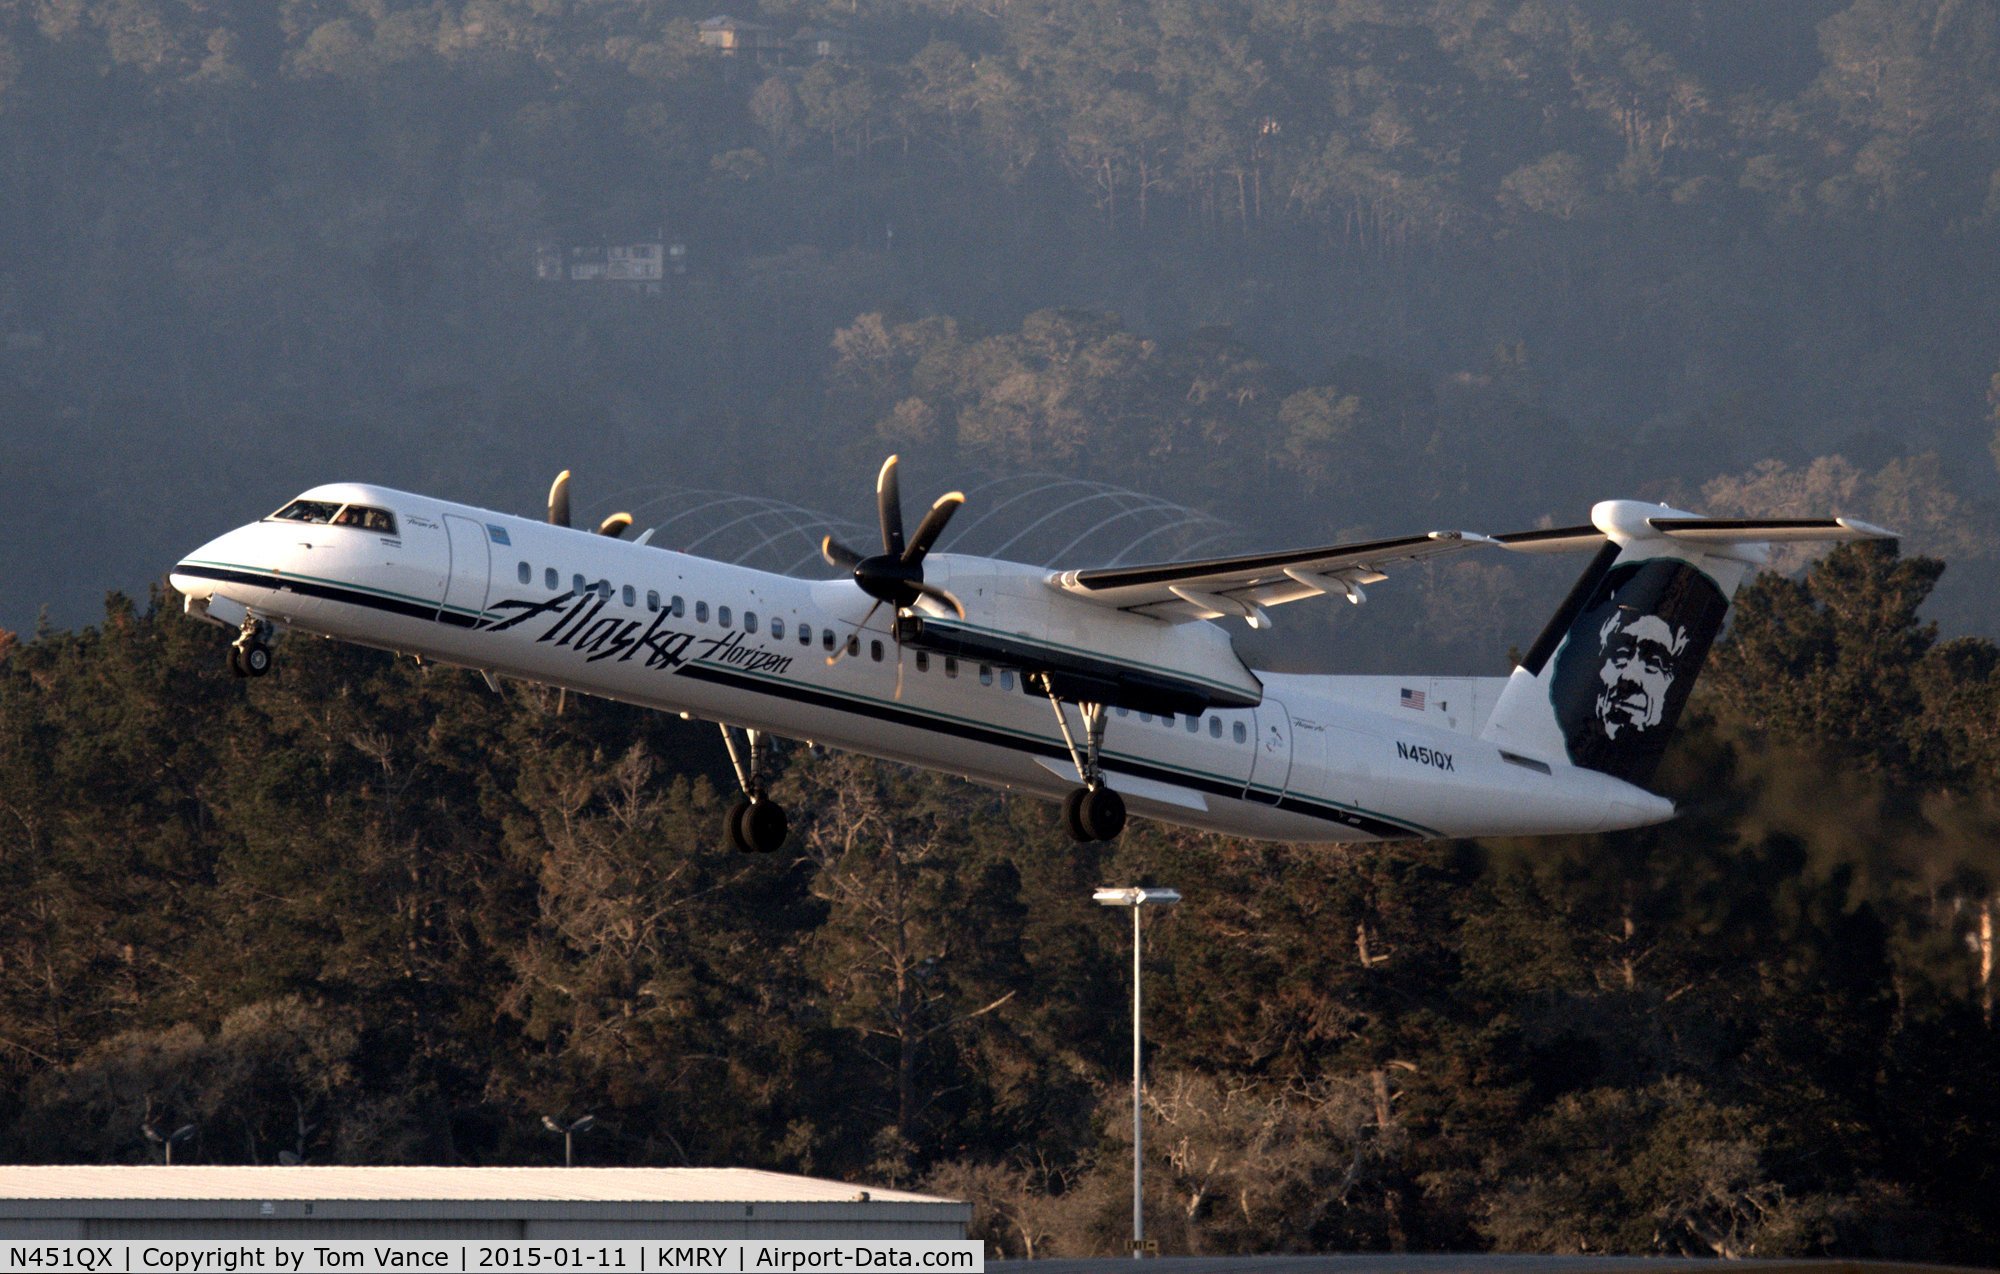 N451QX, 2013 Bombardier DHC-8-402 Dash 8 C/N 4457, departing KMRY for LAX